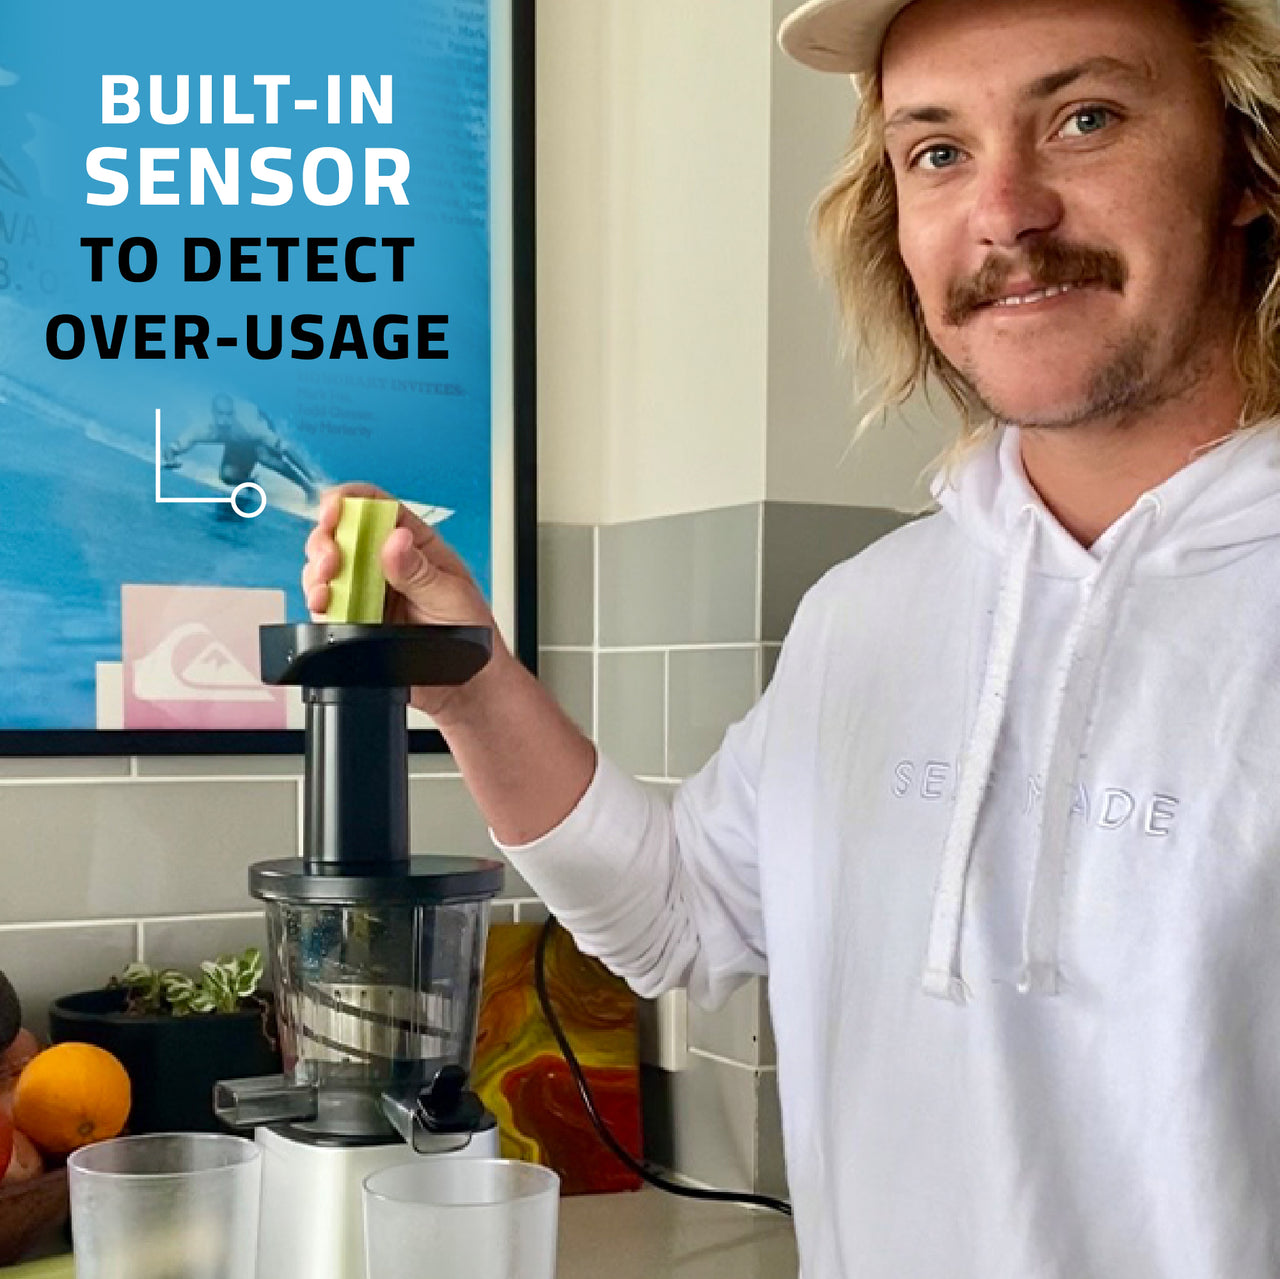 Ninja Cold Press Juicer Pro  Full Review and Demo 